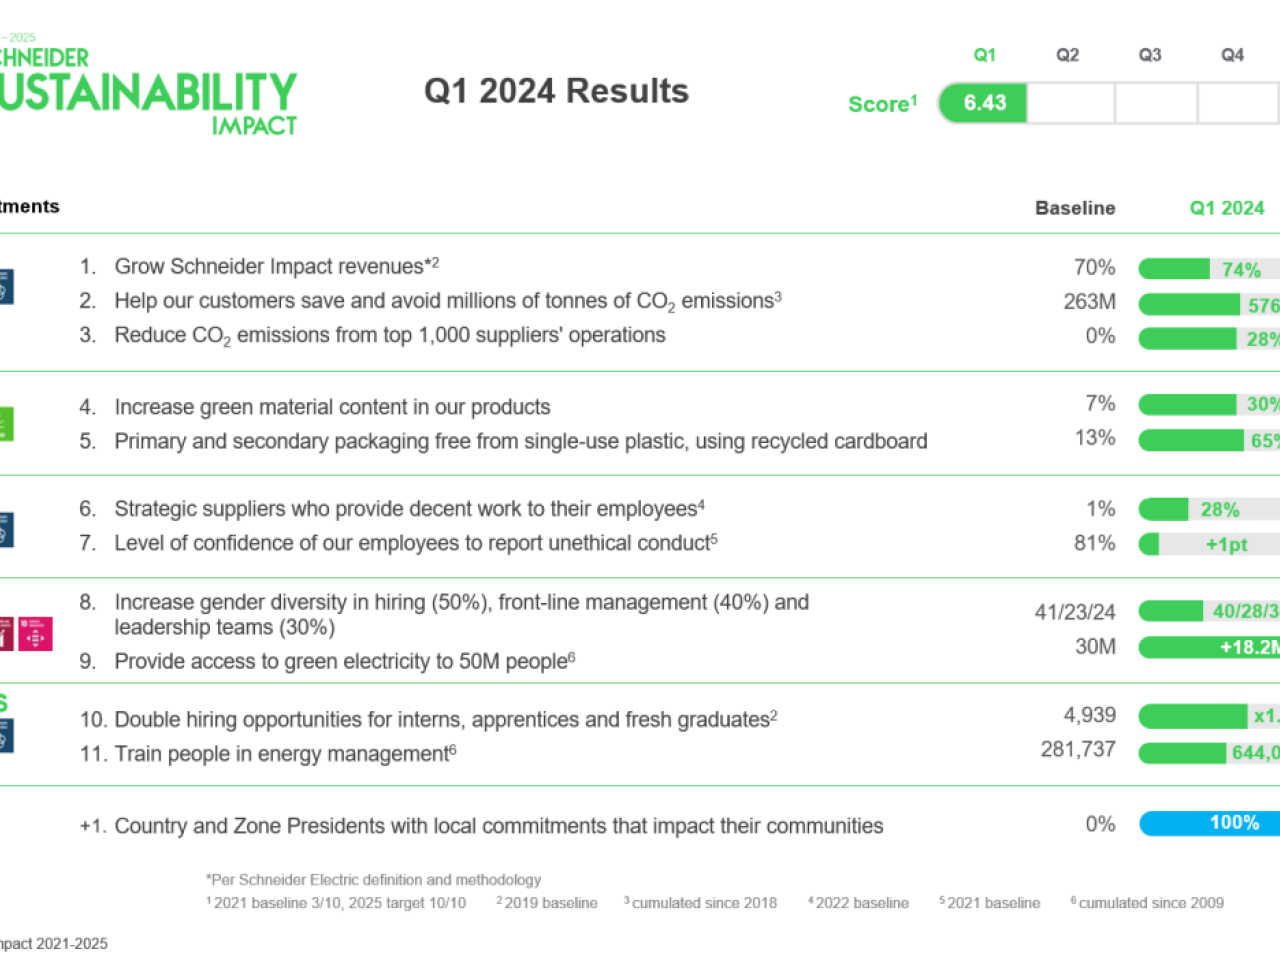 Info graphic "Schneider Sustainability Impact Q1 2024 Results" 6 long-term commitments, baselines and progress.